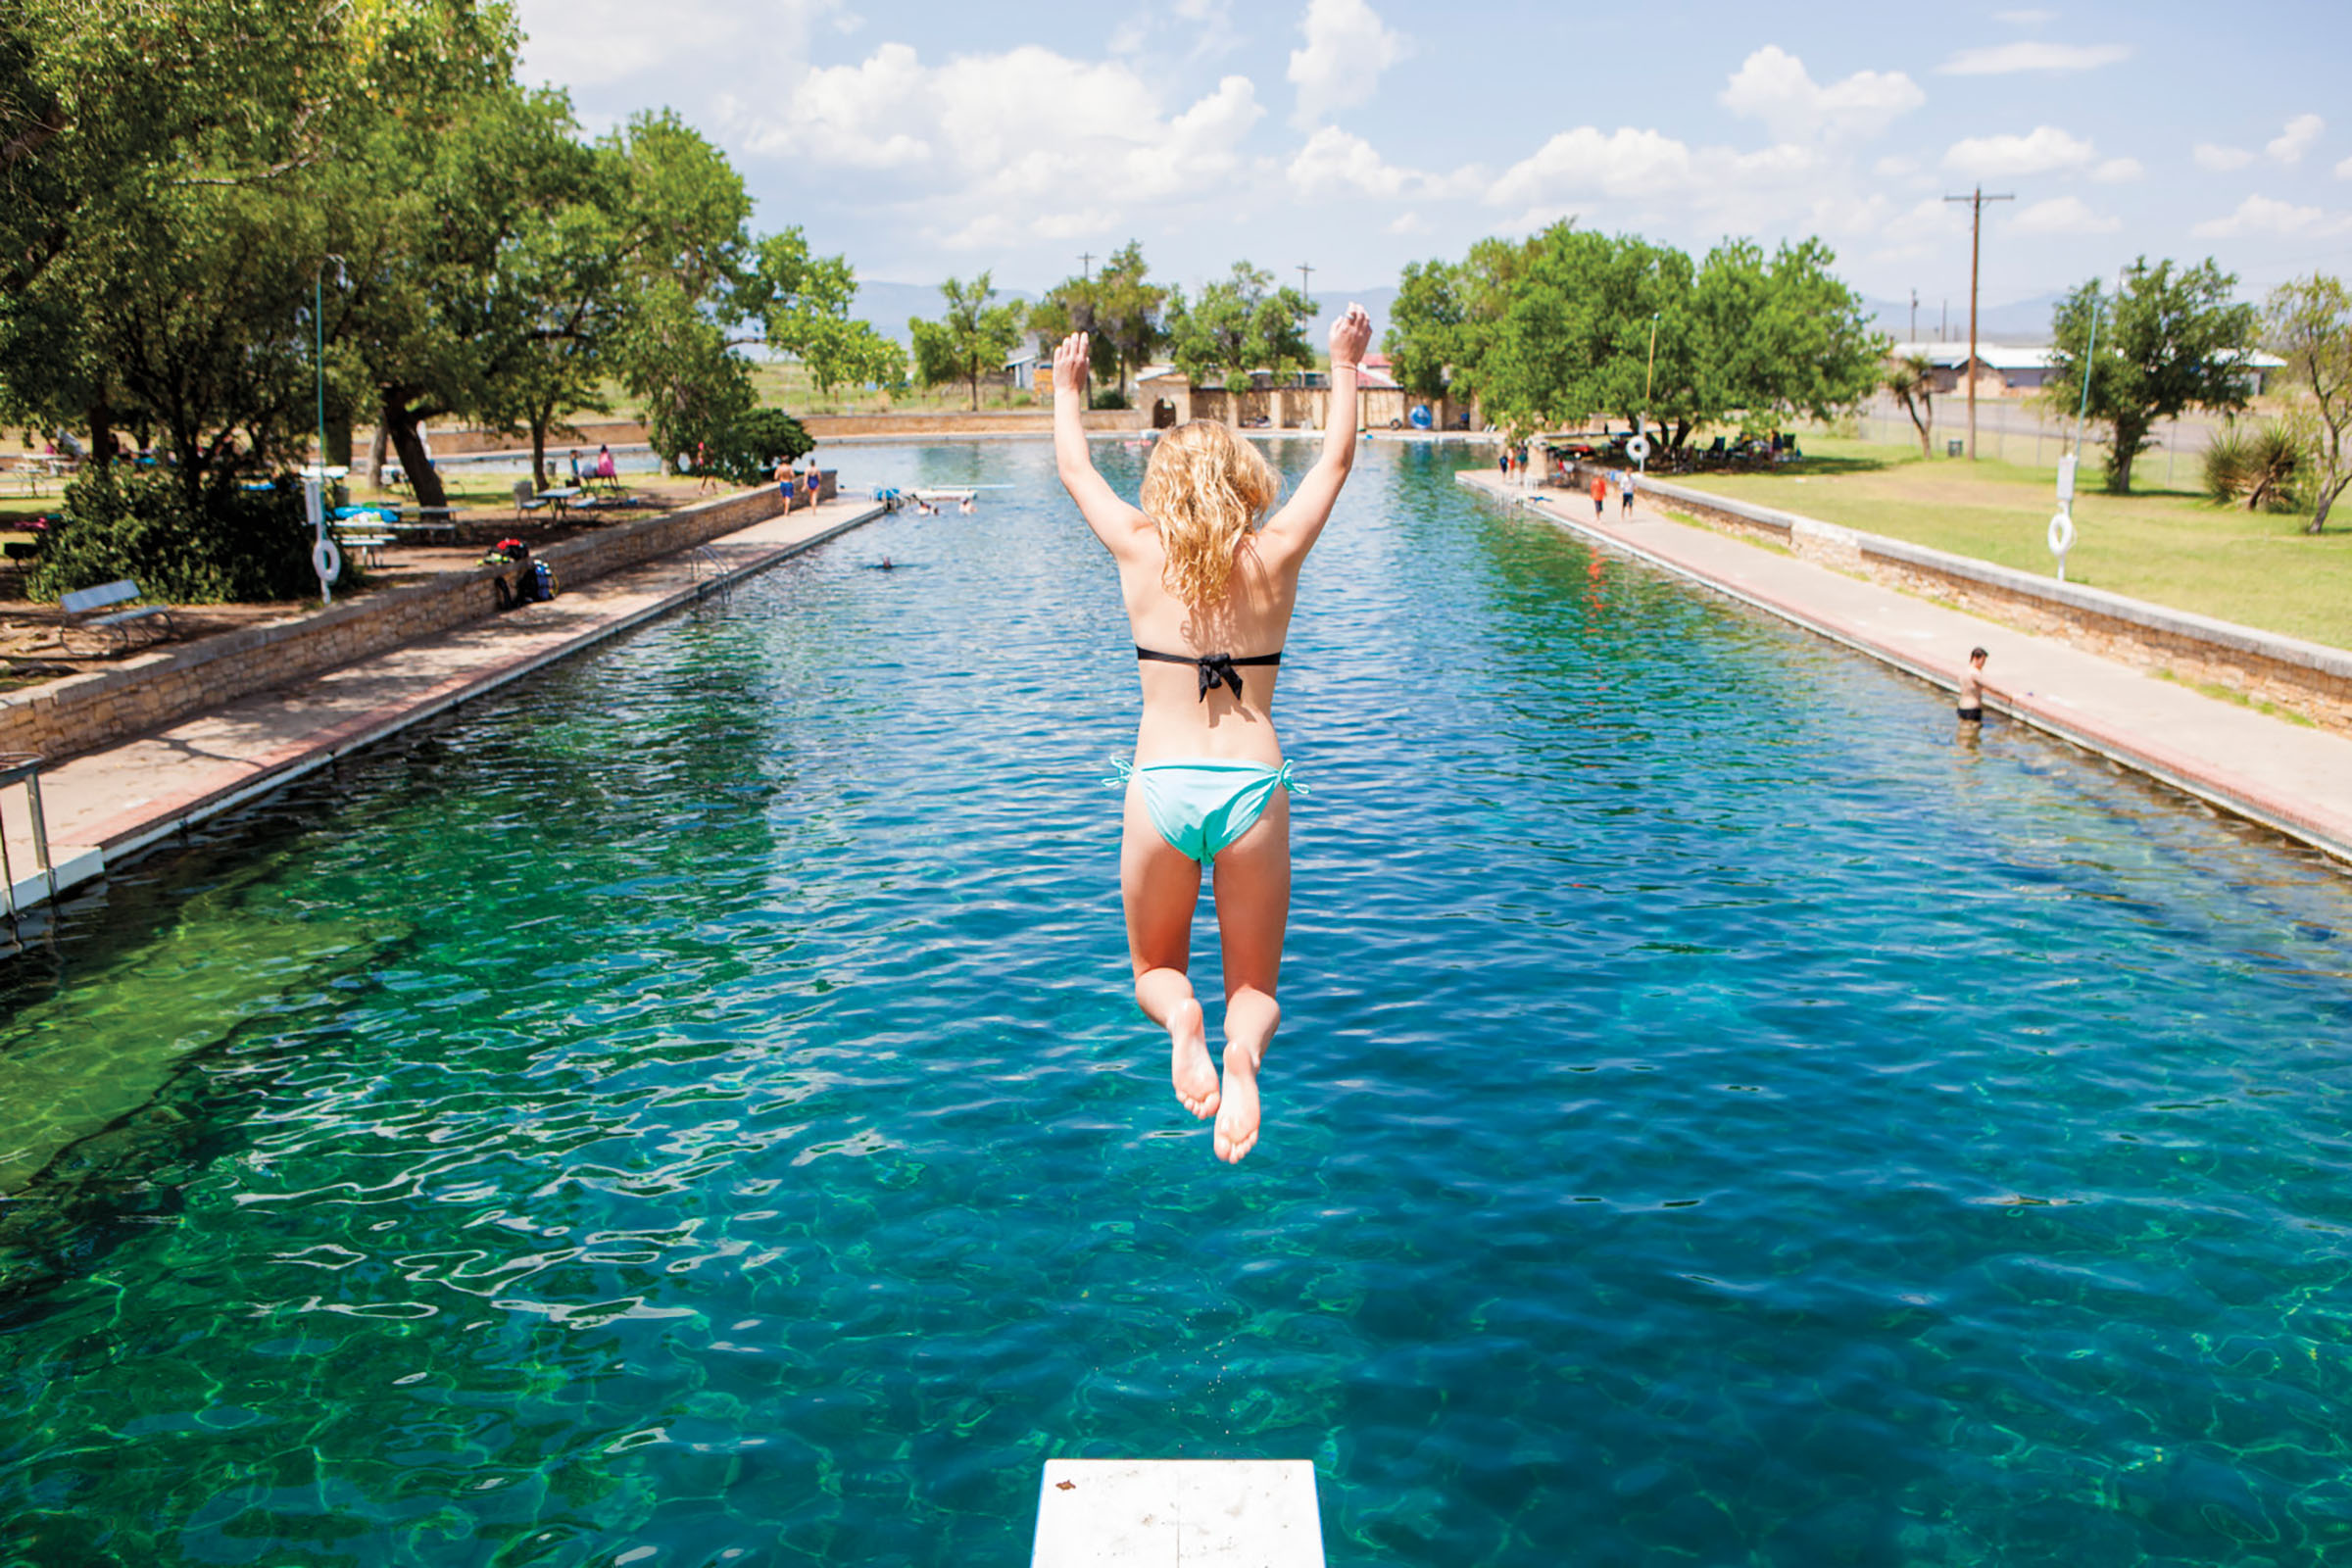 The swimming pool at Balmorhea State Park in West Texas